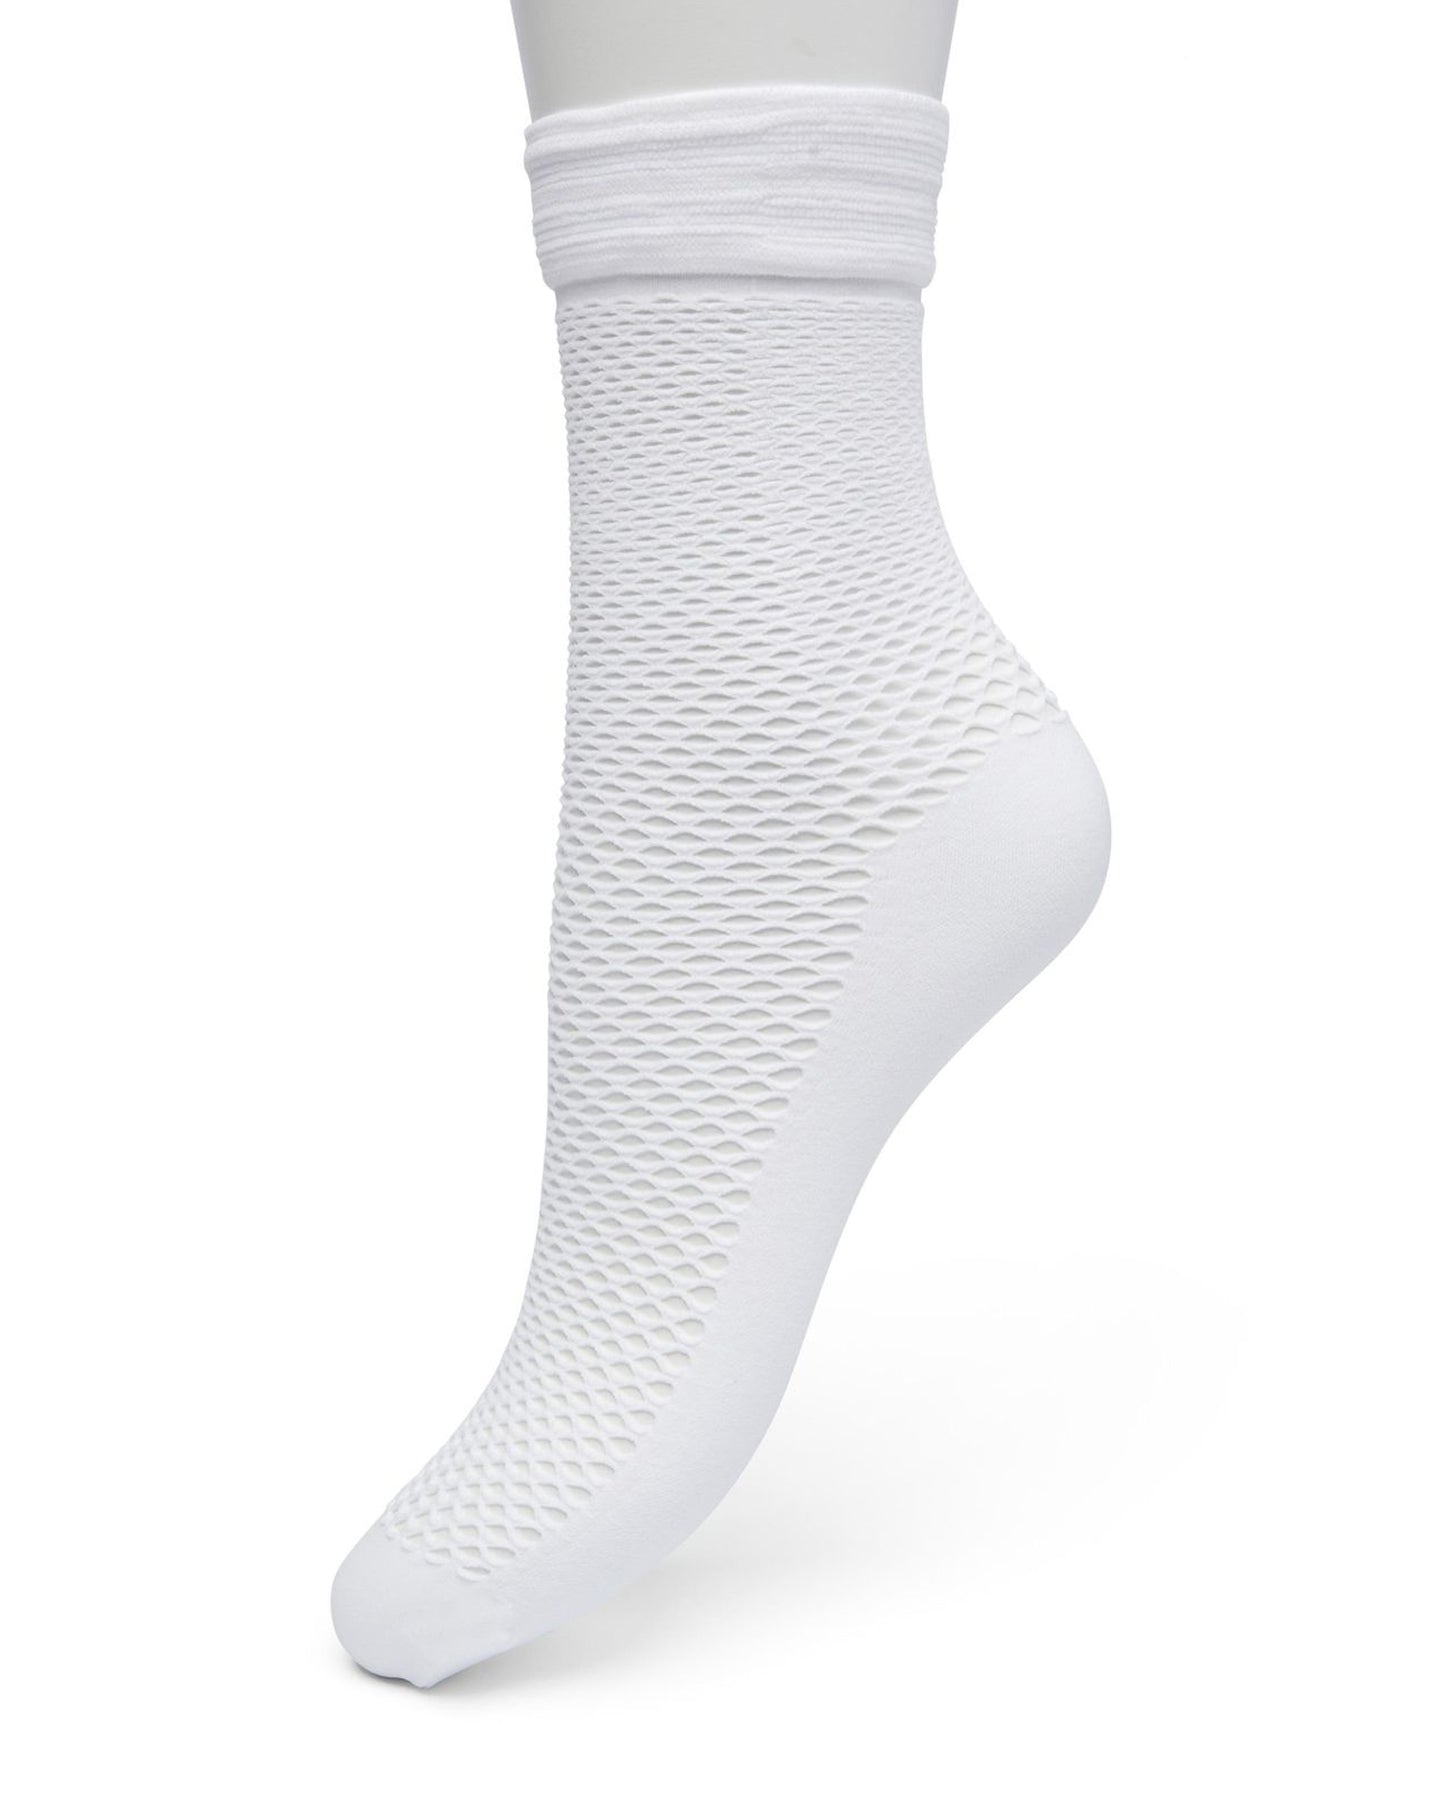 Bonnie Doon Sporty Fishnet Socks - White fishnet ankle socks with a plain opaque sole and reinforced toe and deep elasticated comfort cuff with a white double sports stripe.